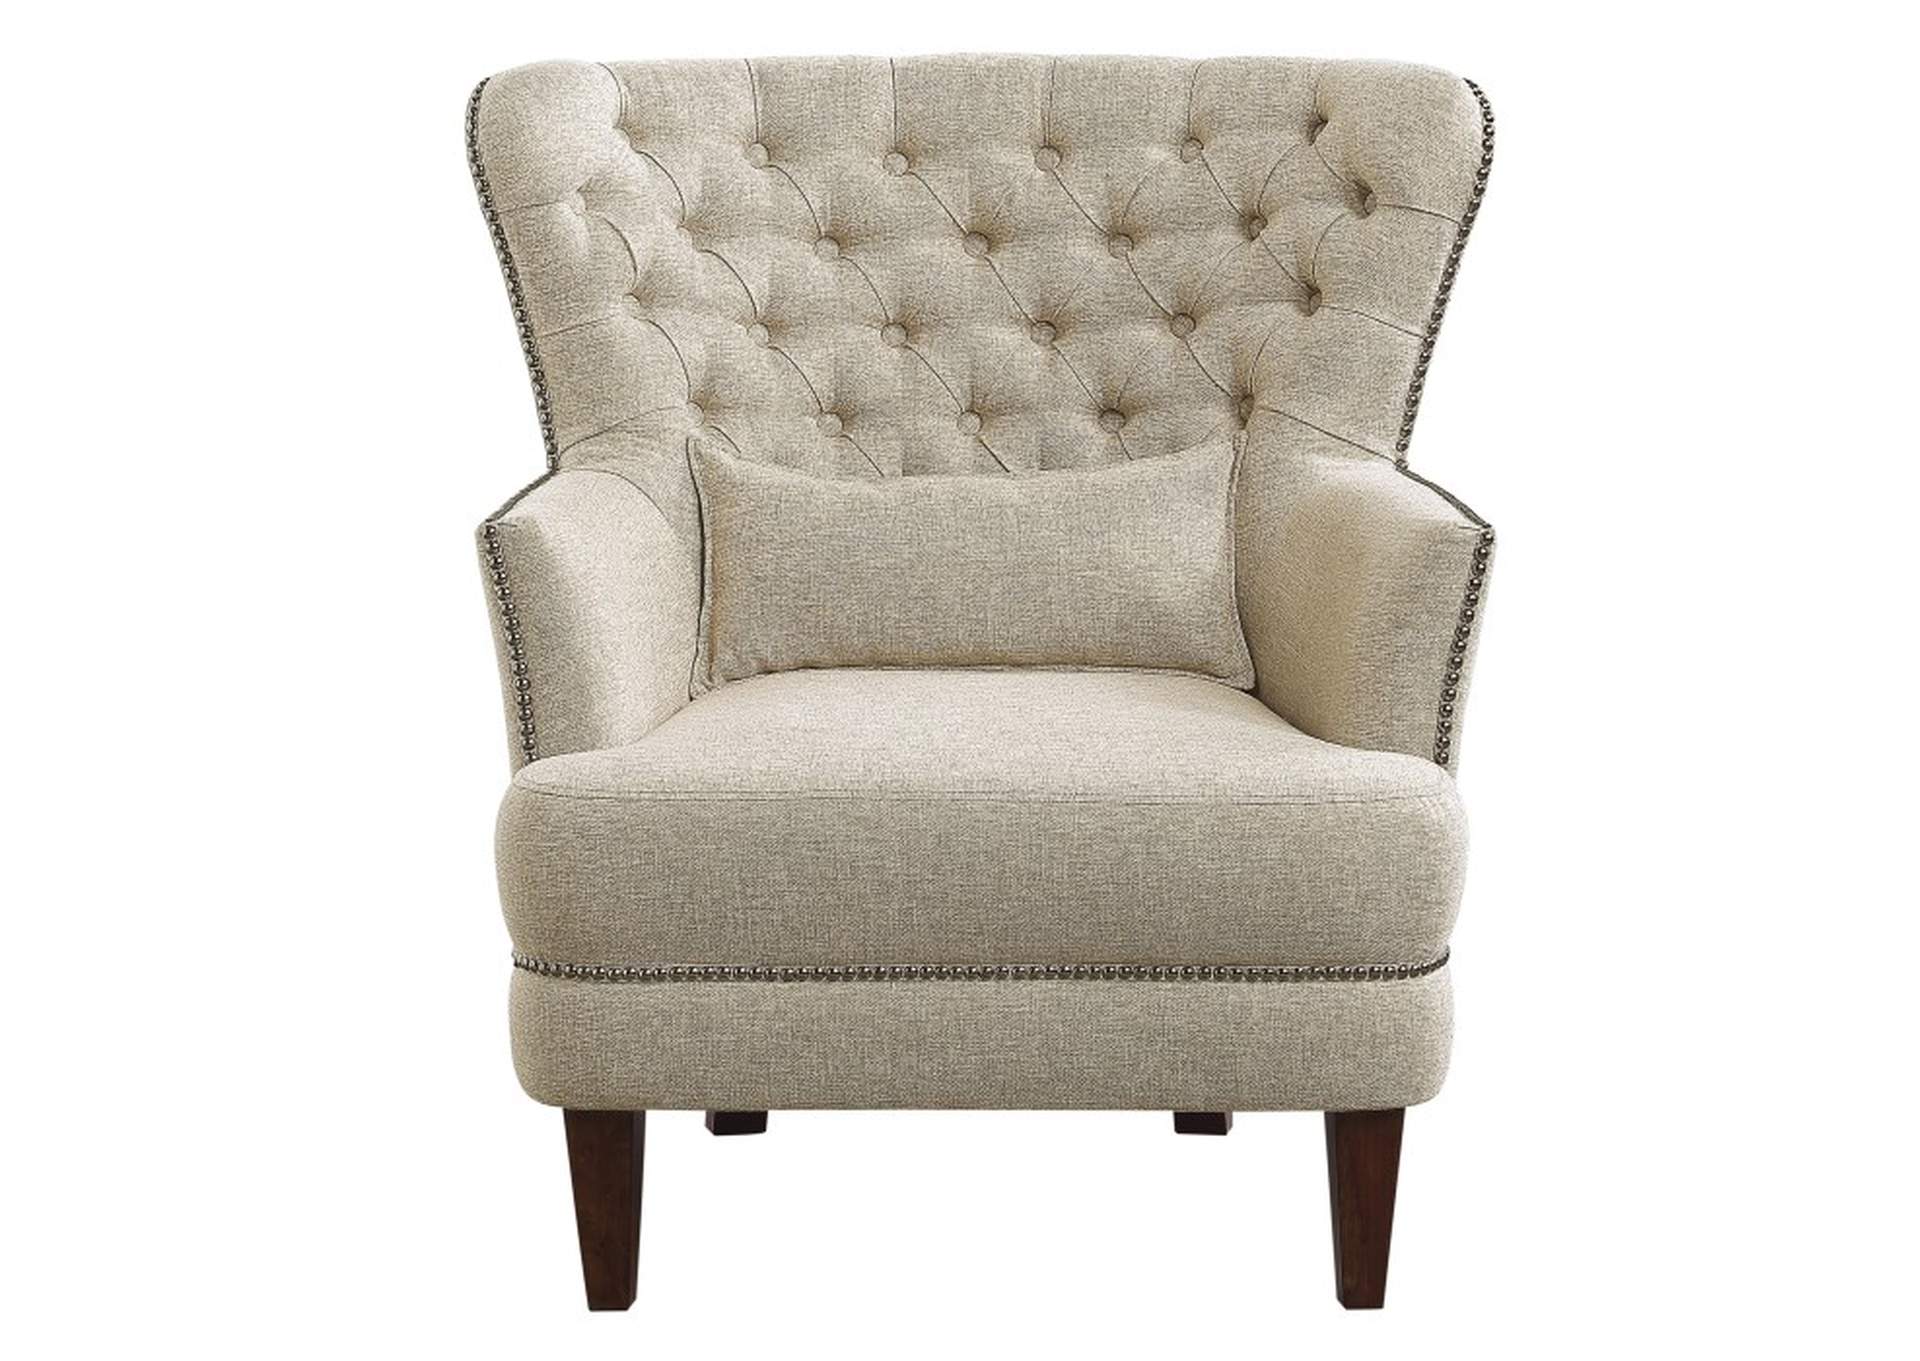 Marriana Accent Chair,Homelegance